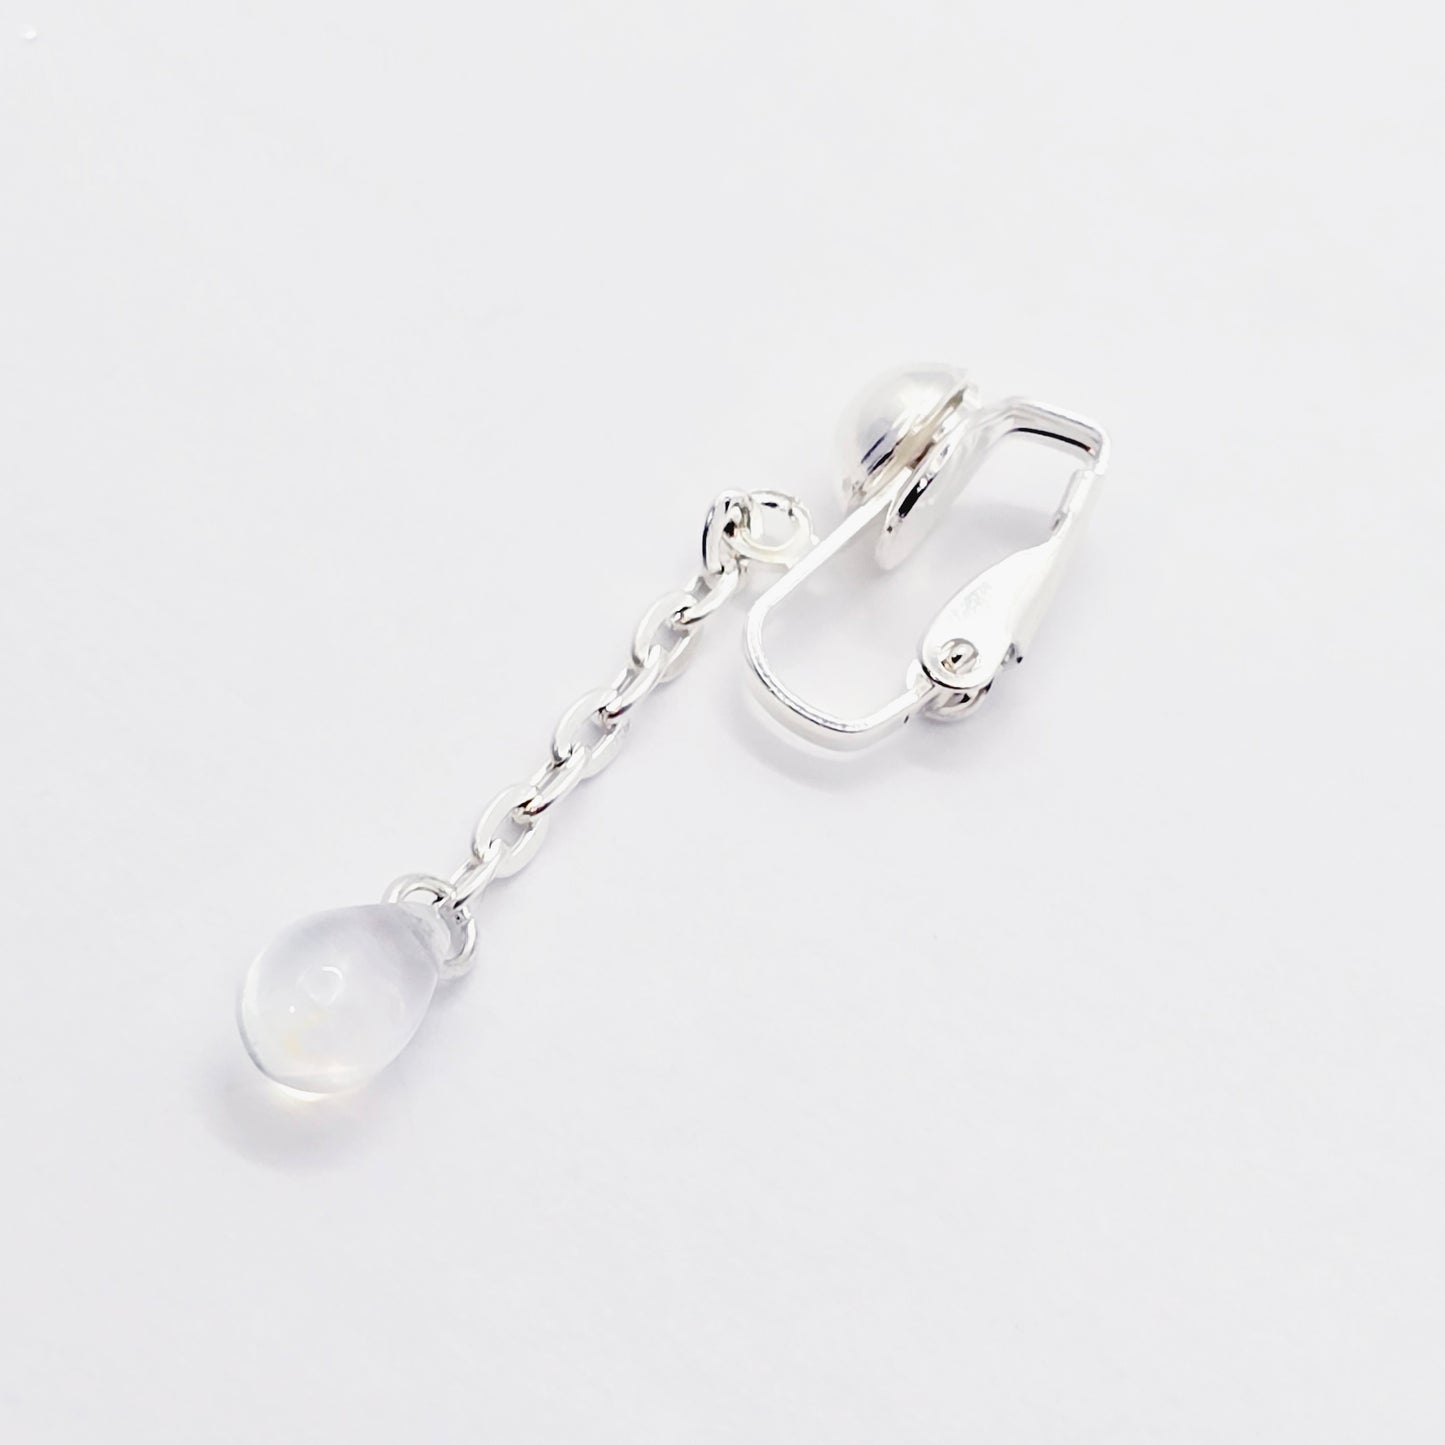 Vaginal Clit Clamp/ Intimate Jewelry Clip with Teardrop Crystal. VCH Clip.